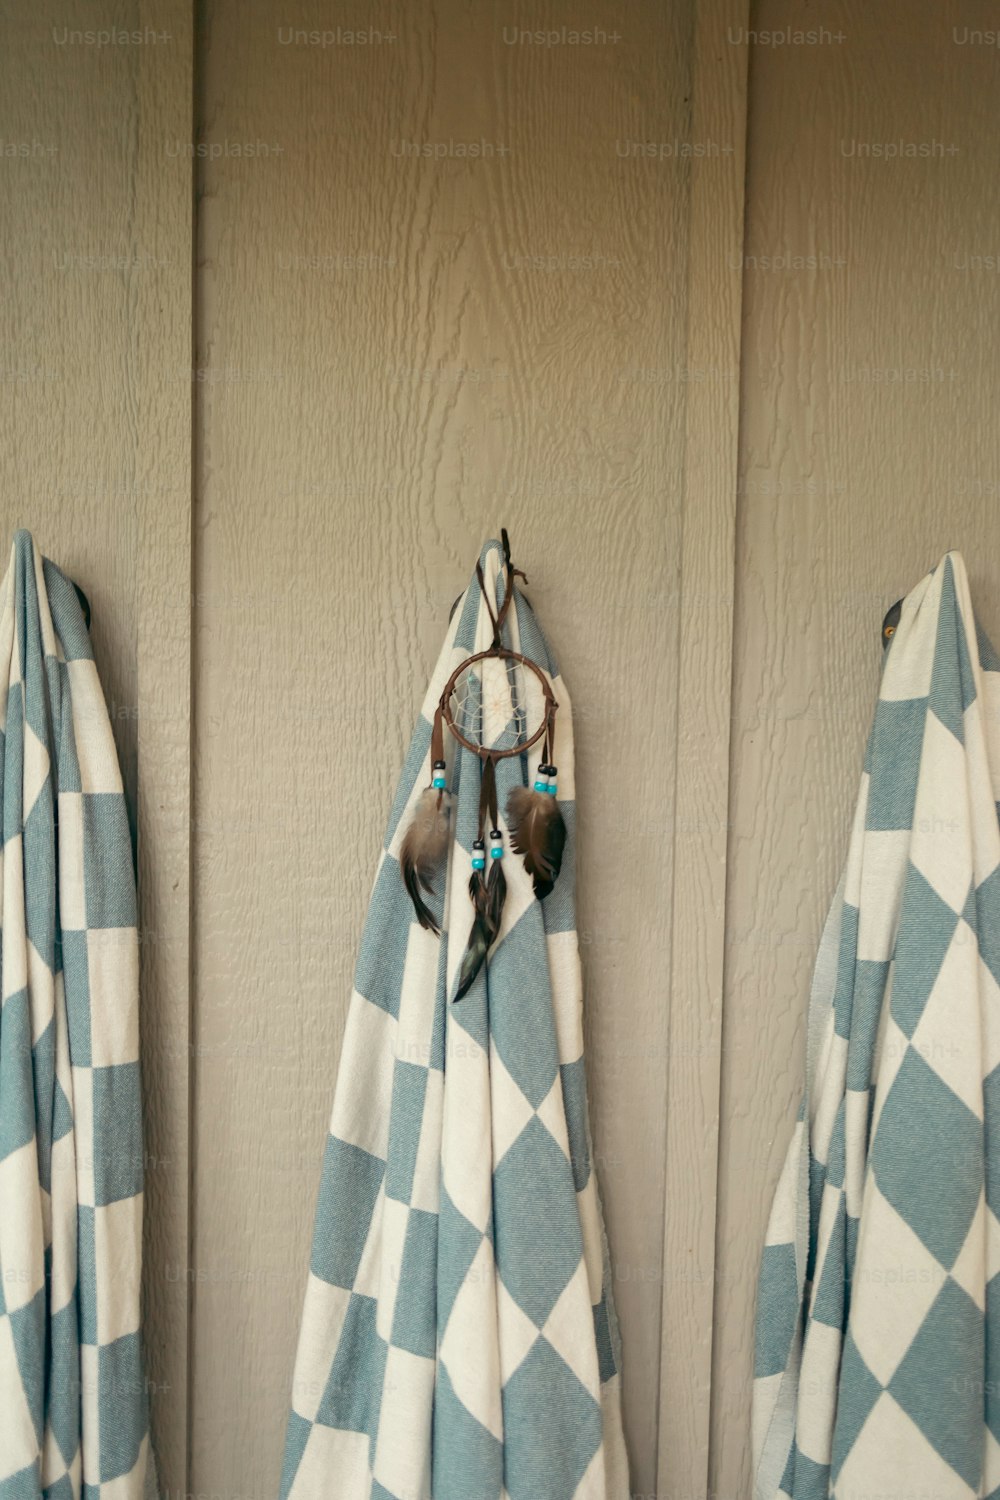 Bath Towels Hanging On The Wall Stock Photo, Picture and Royalty